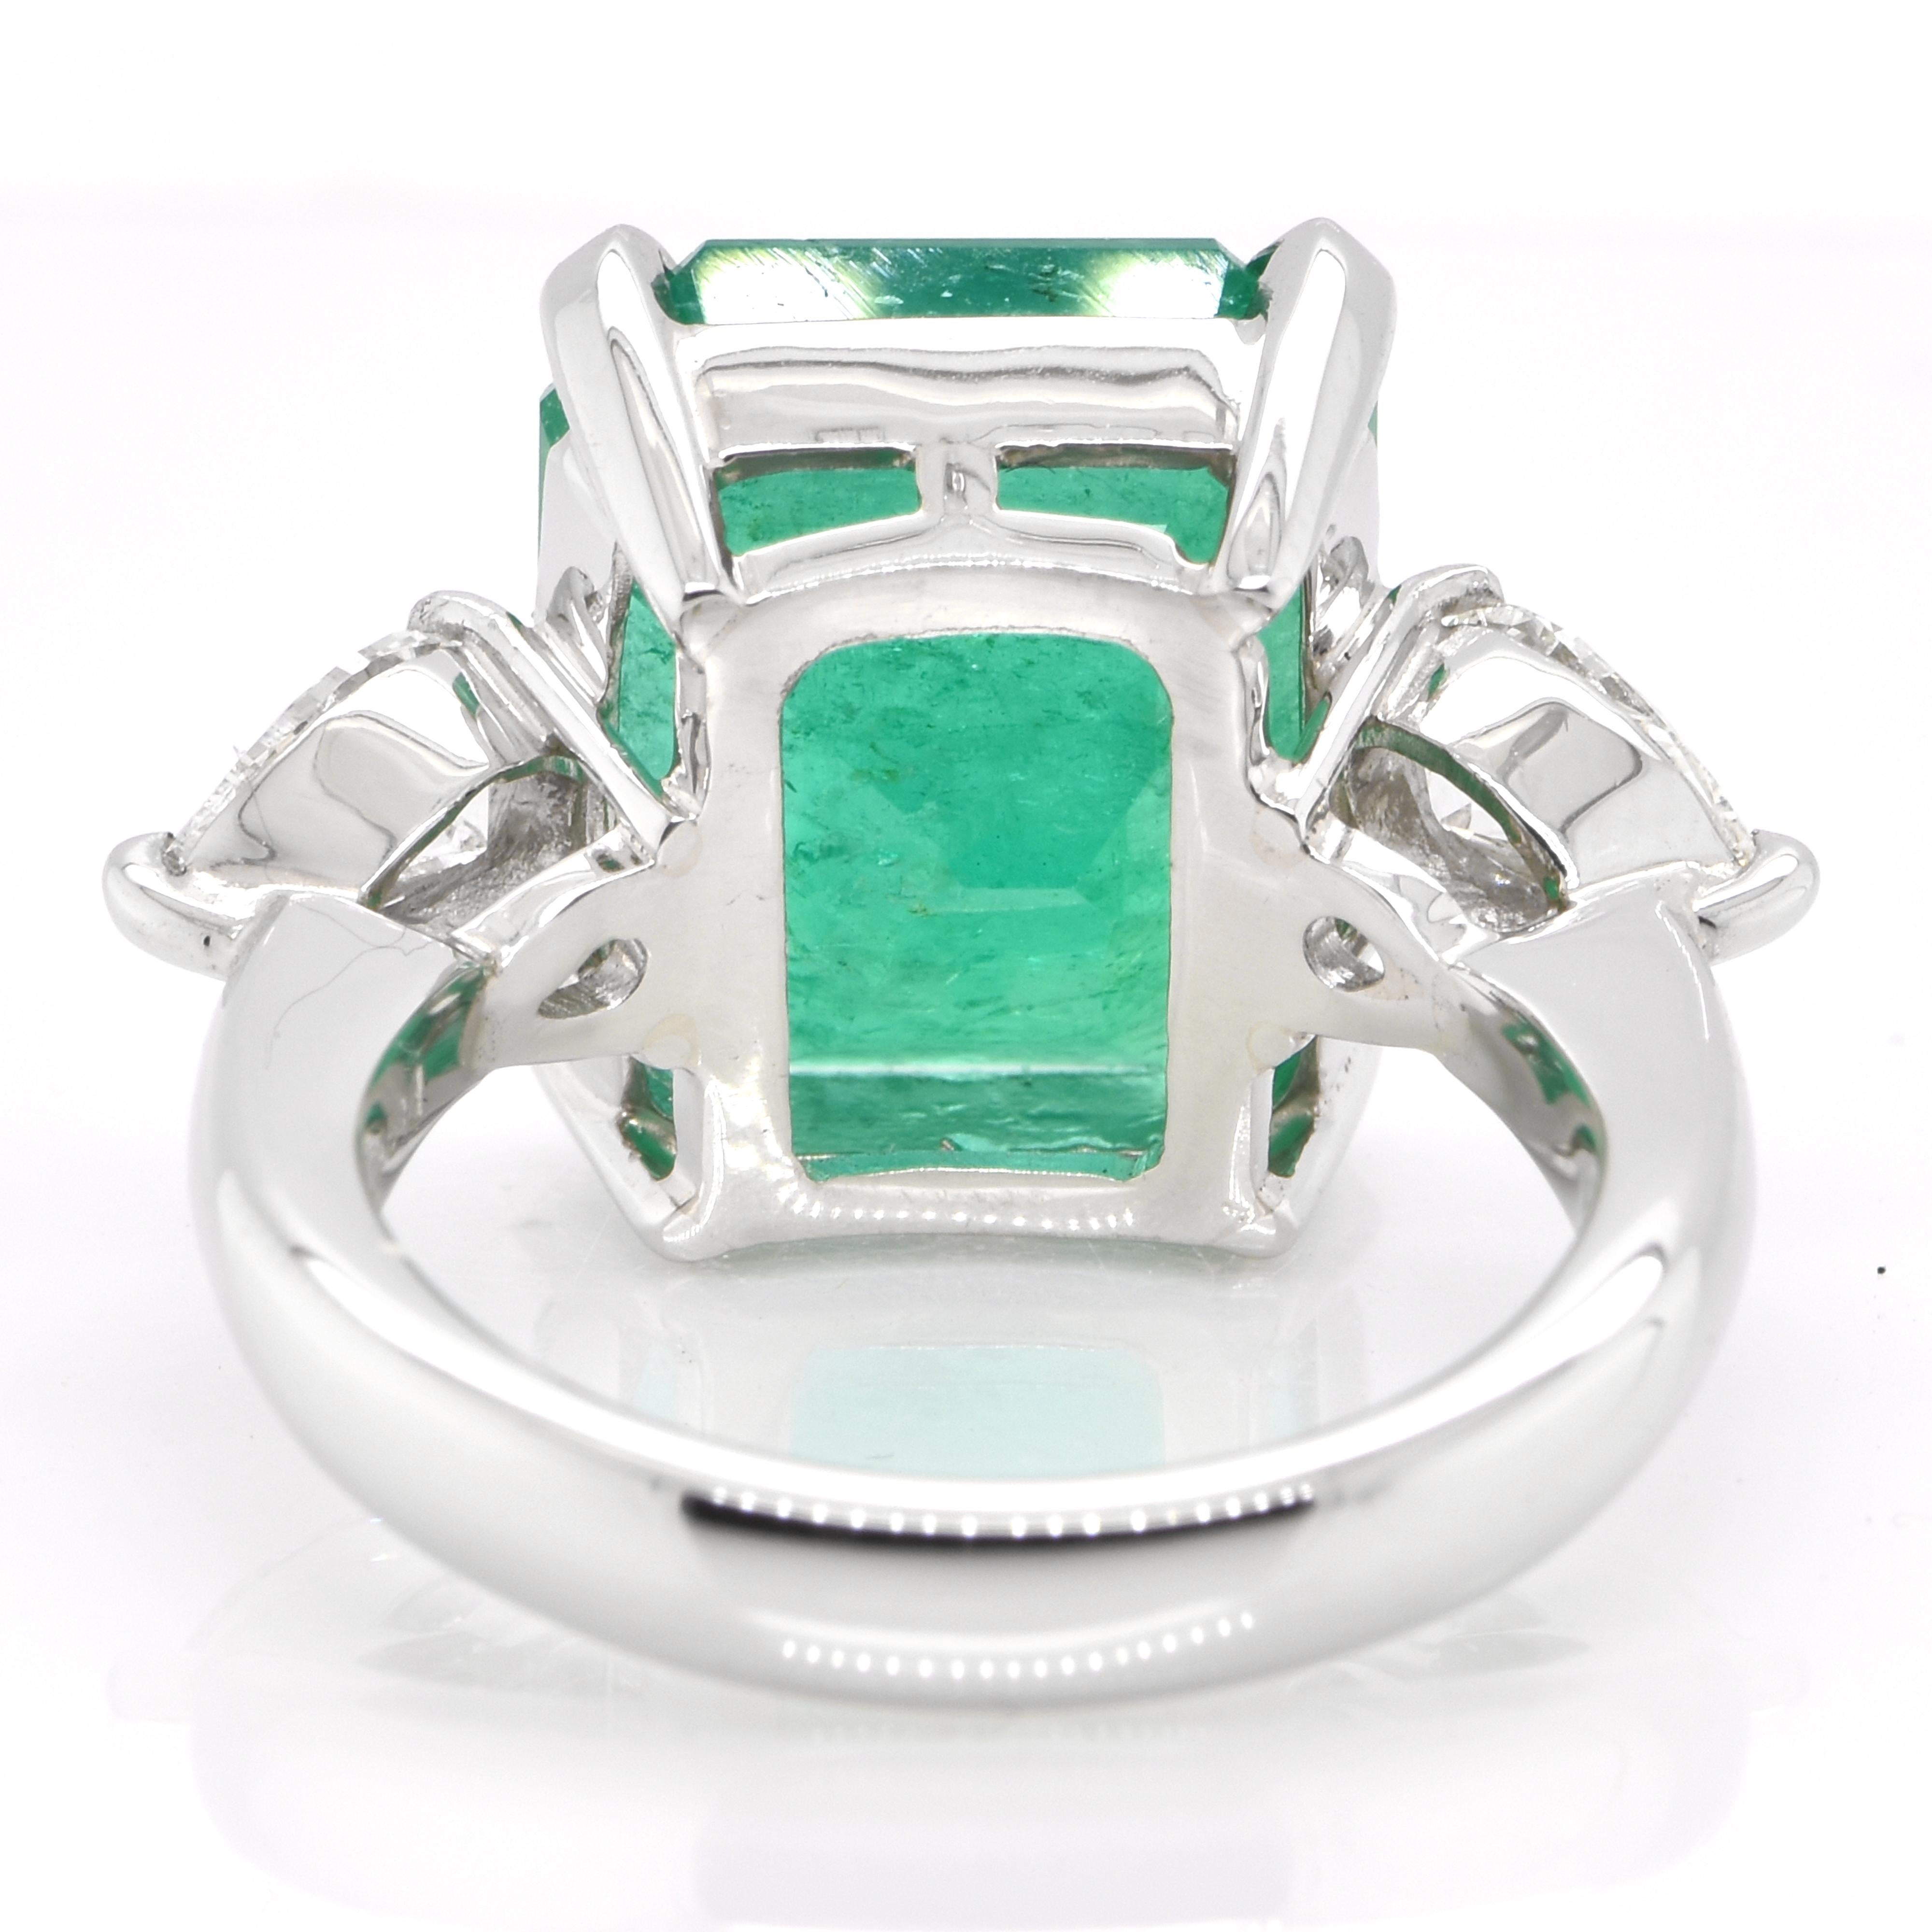 Women's 8.56 Carat Colombian Emerald and Diamond Cocktail Ring Set in Platinum For Sale